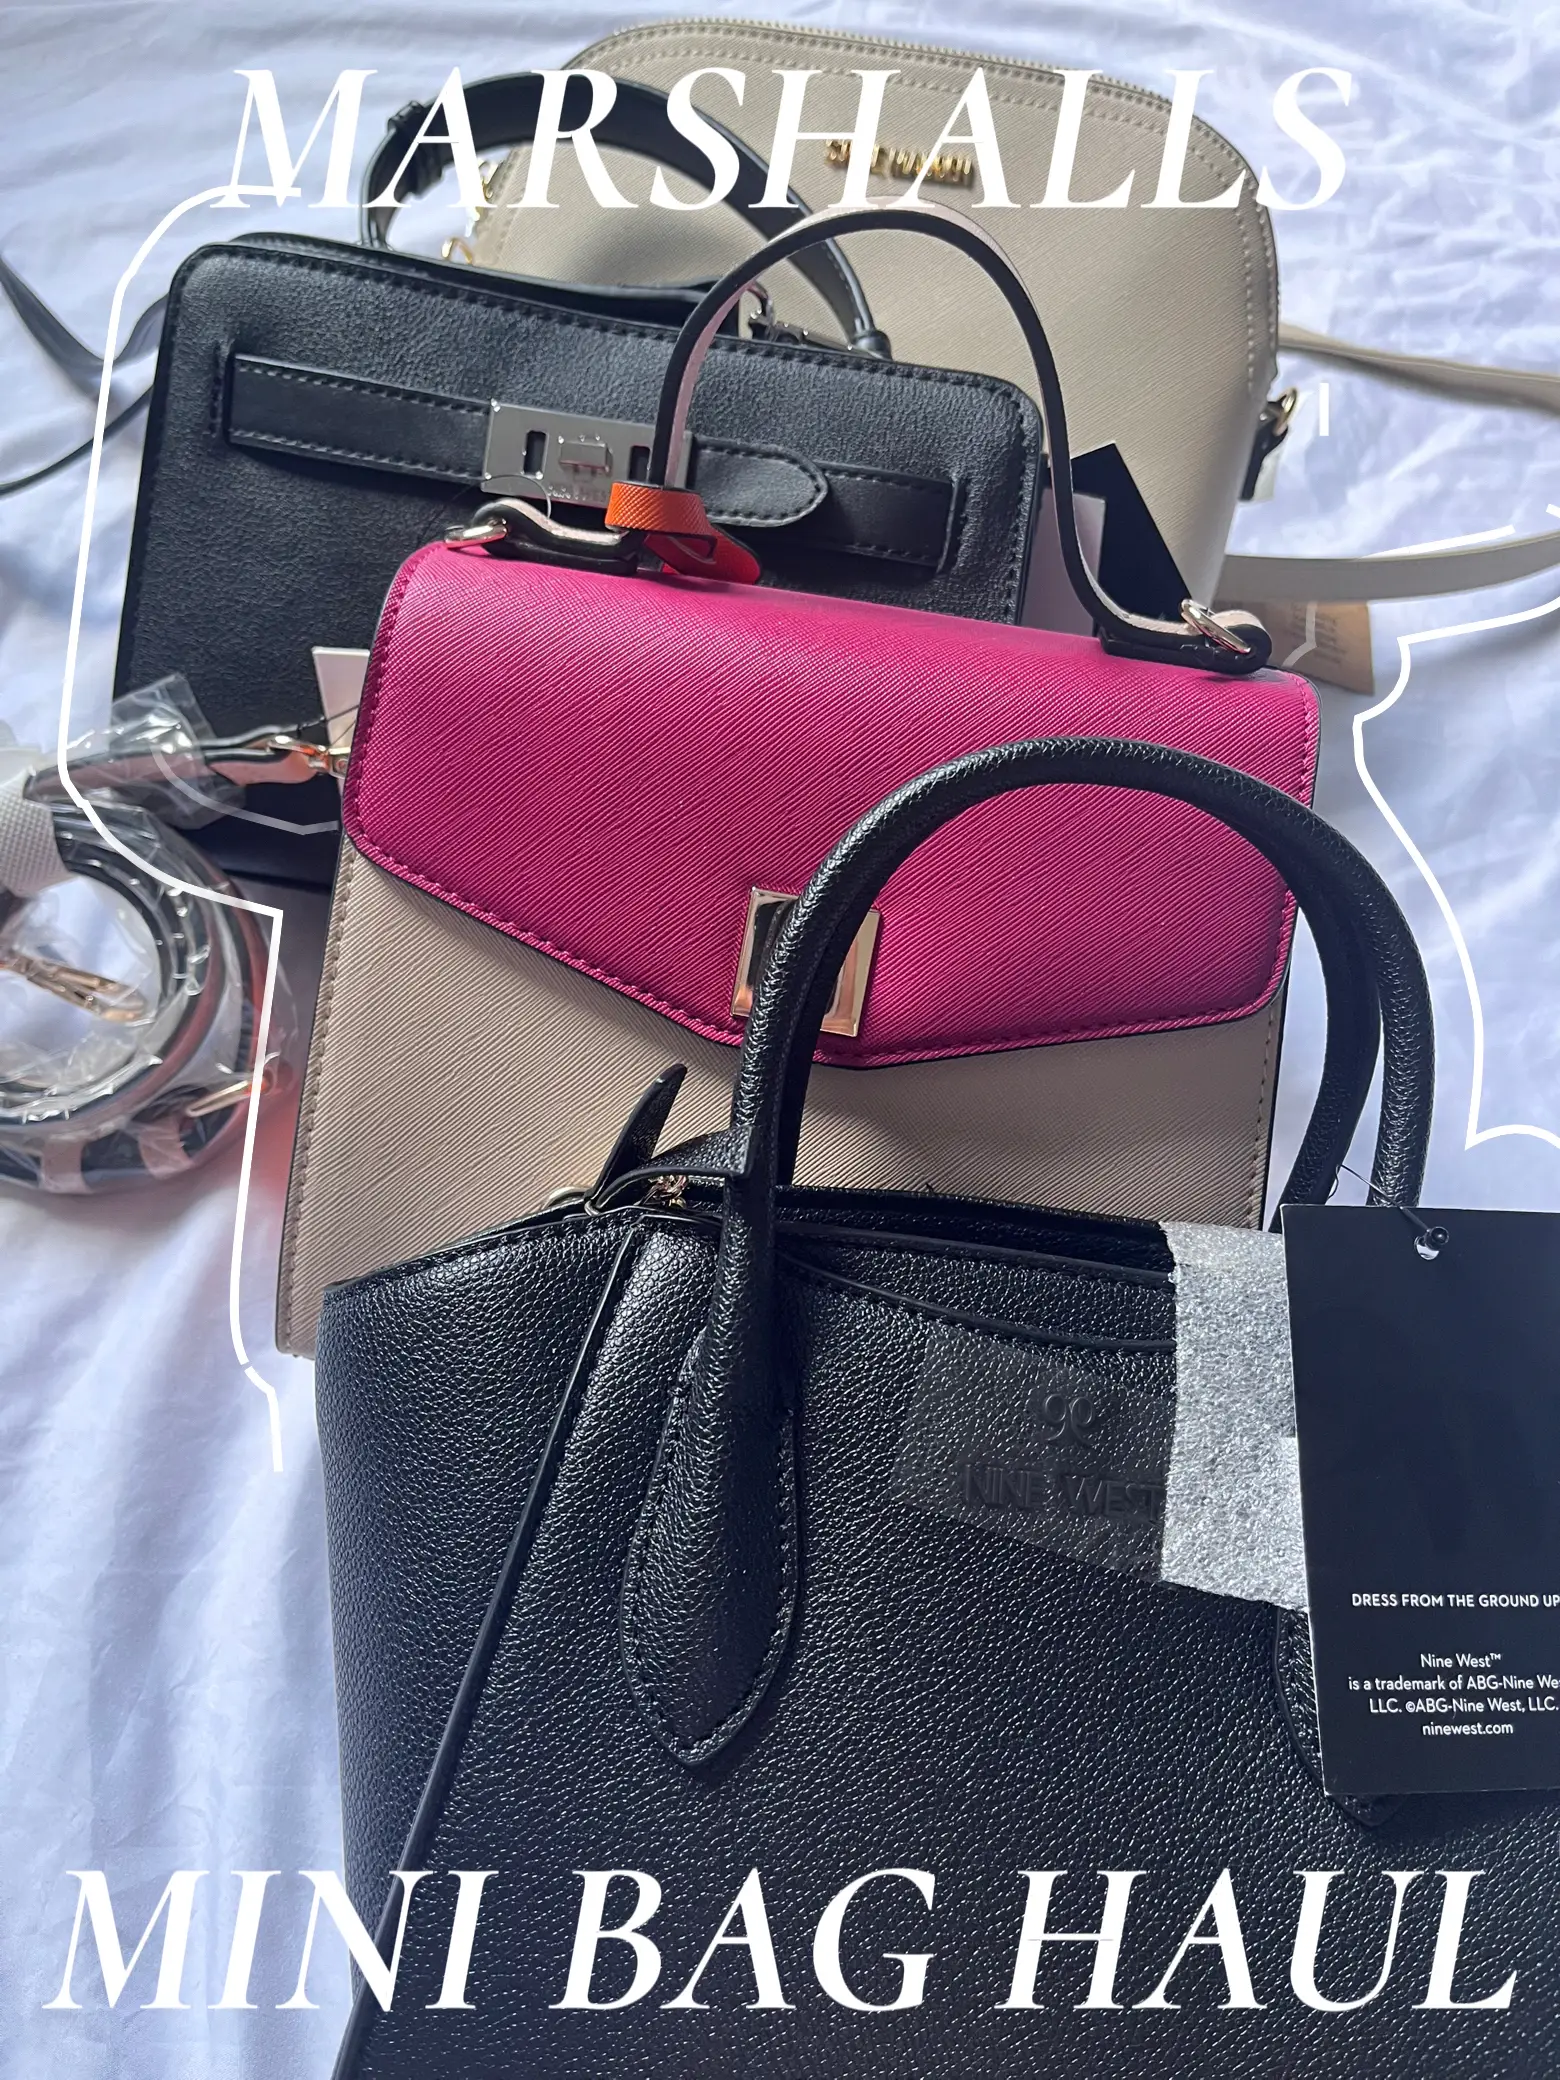 Marshalls SHOP WITH ME Designer HANDBAGS Clearance & NEW FINDS 